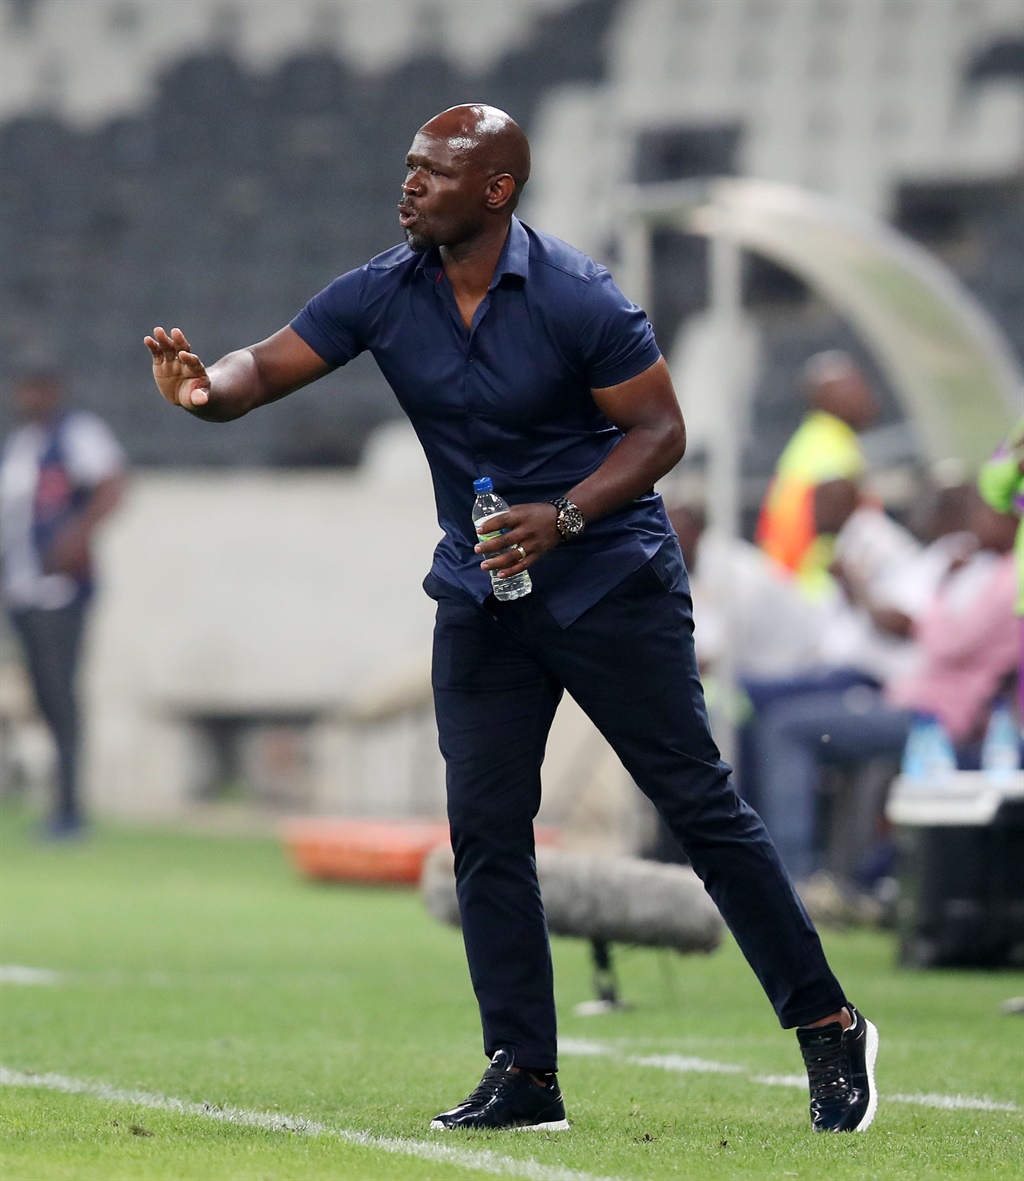 Steve Komphela, coach of Golden Arrows  during the 2019 Telkom Knockout Quarter Final match between Supersport United and Golden Arrows at the Mbombela Stadium, Nelspruit on the 02 November 2019